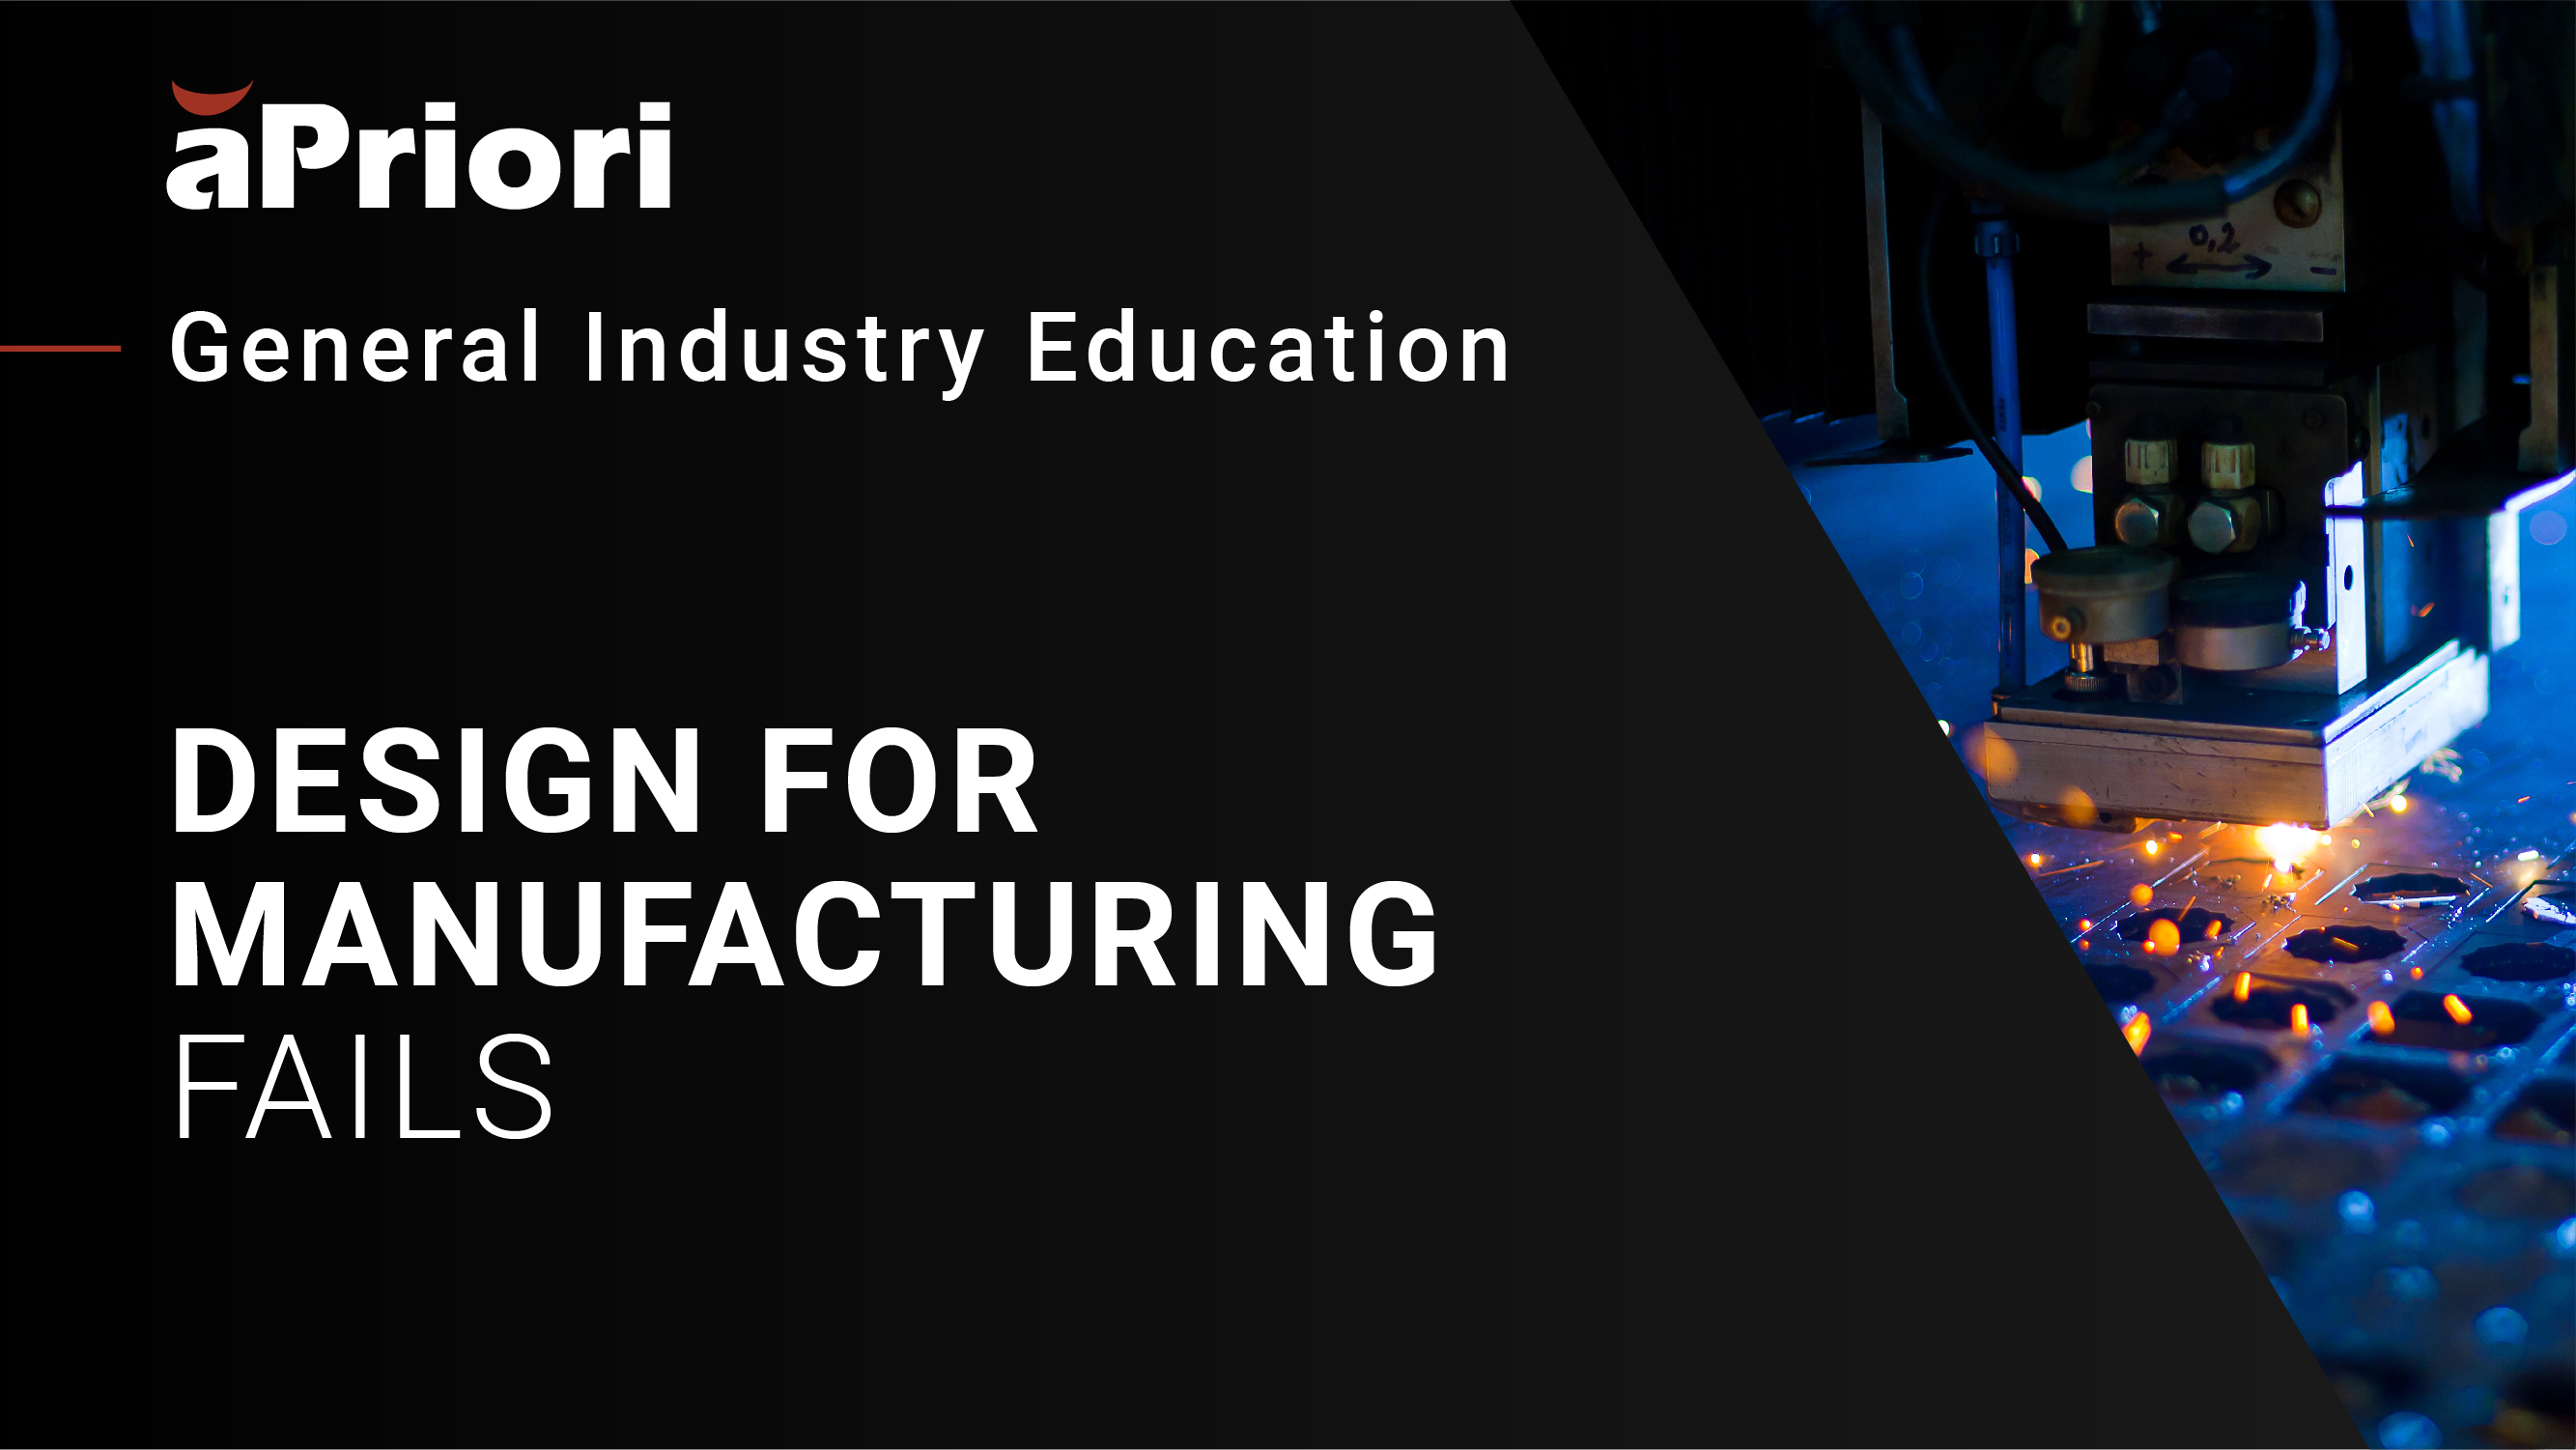 aPriori Design For Manufacturing - A Core Benefit of Manufacturing Intelligence Technology